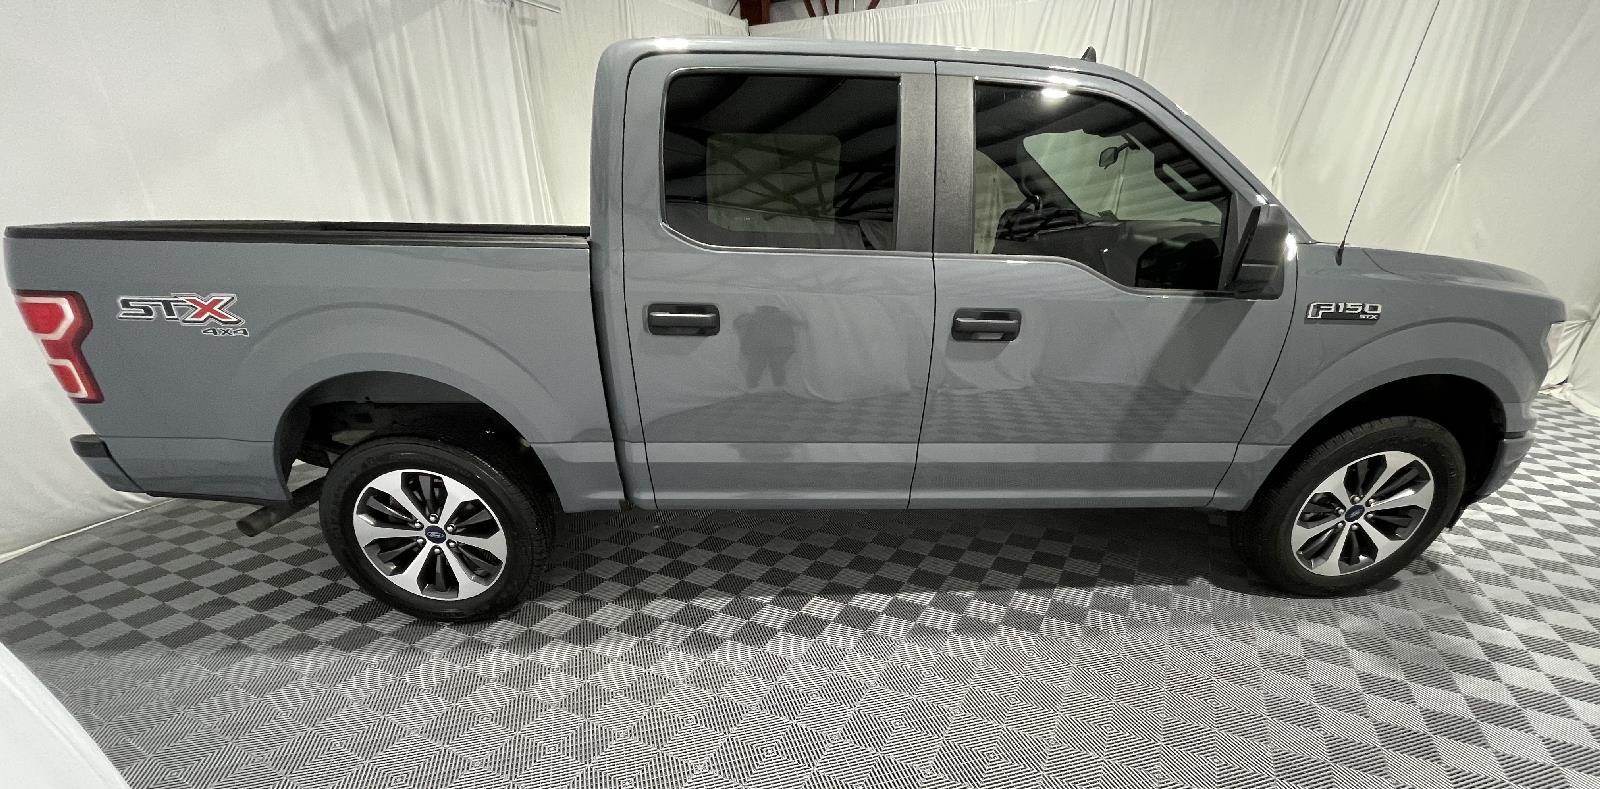 Used 2020 Ford F-150 XL Crew Cab Truck for sale in St Joseph MO